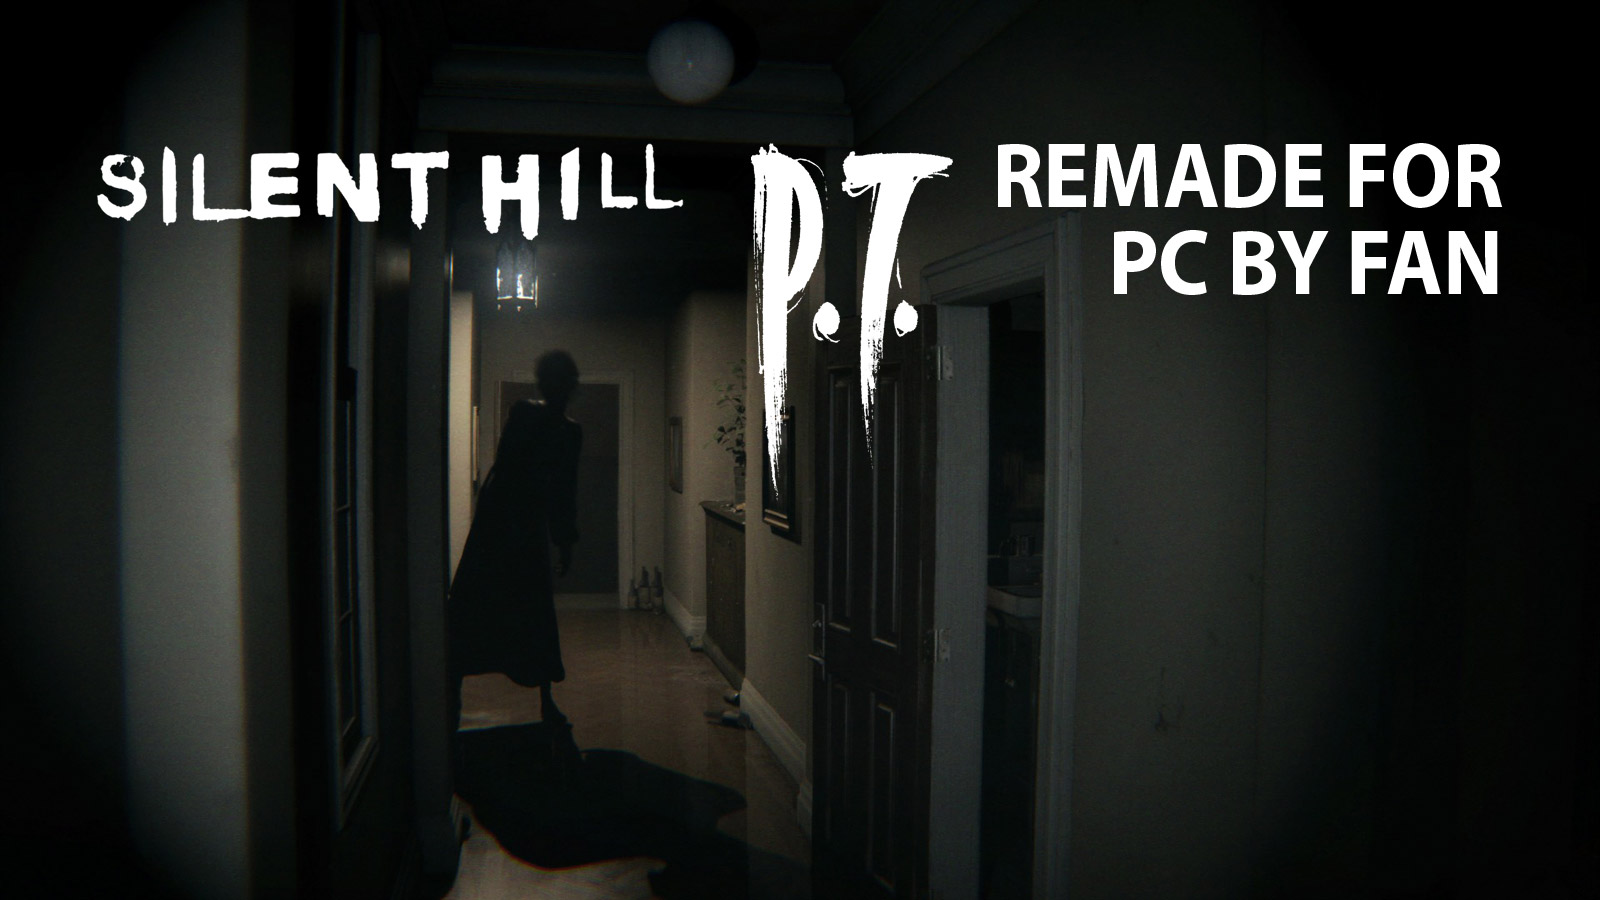 Silent Hills P.T. Remake for PC by Fan